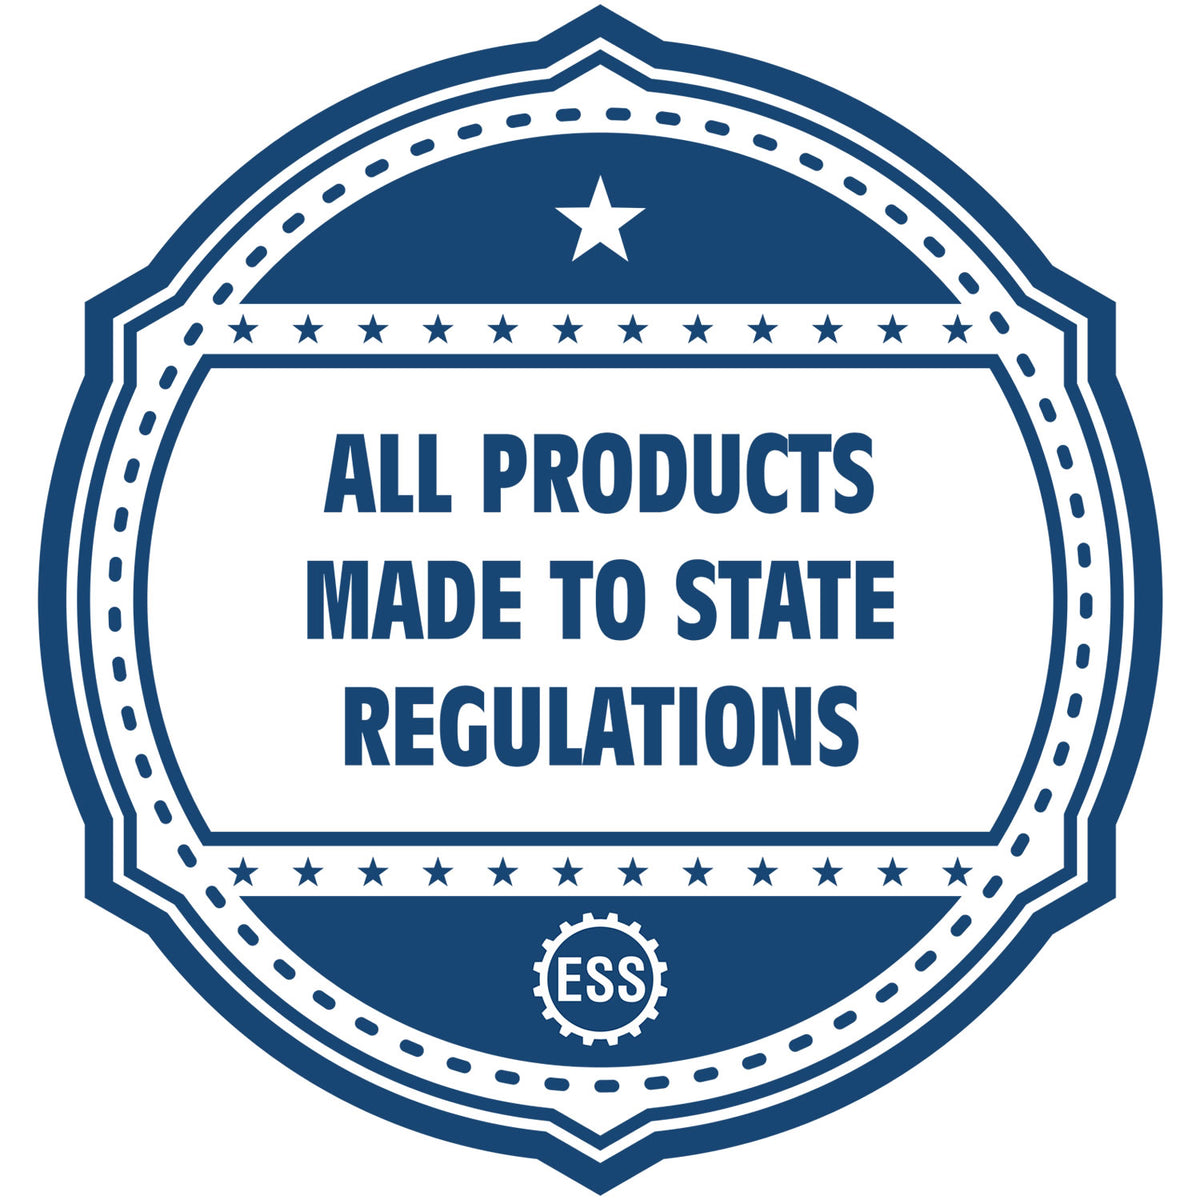 An icon or badge element for the Soft Pocket Kentucky Landscape Architect Embosser showing that this product is made in compliance with state regulations.